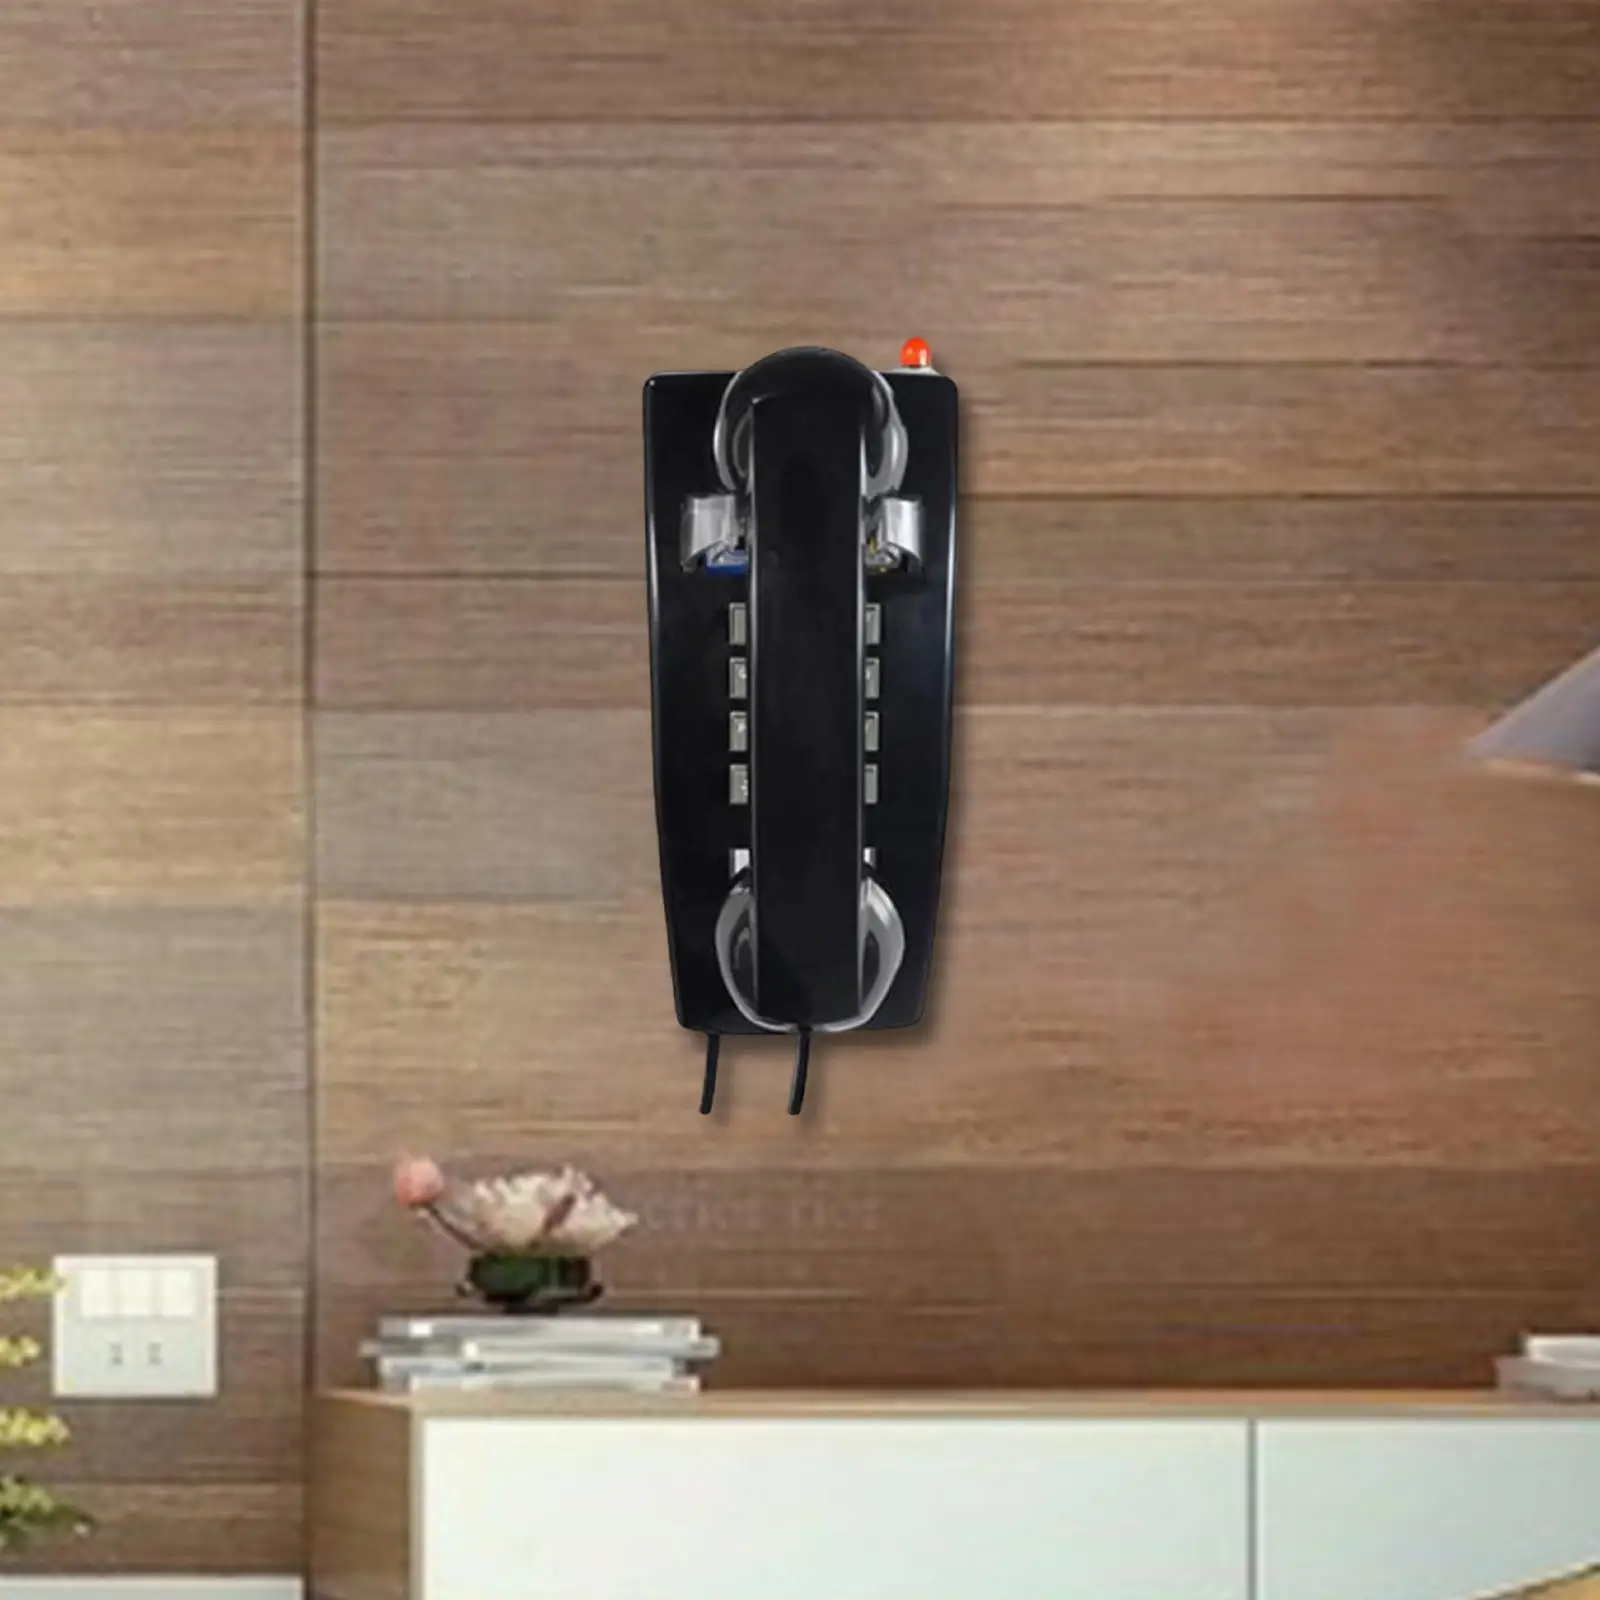 Retro Wall Telephone Wall Mount Phone with Cord with Indicator with Mechanical Ringing Wall Phone Landline for Garage Hotel Home